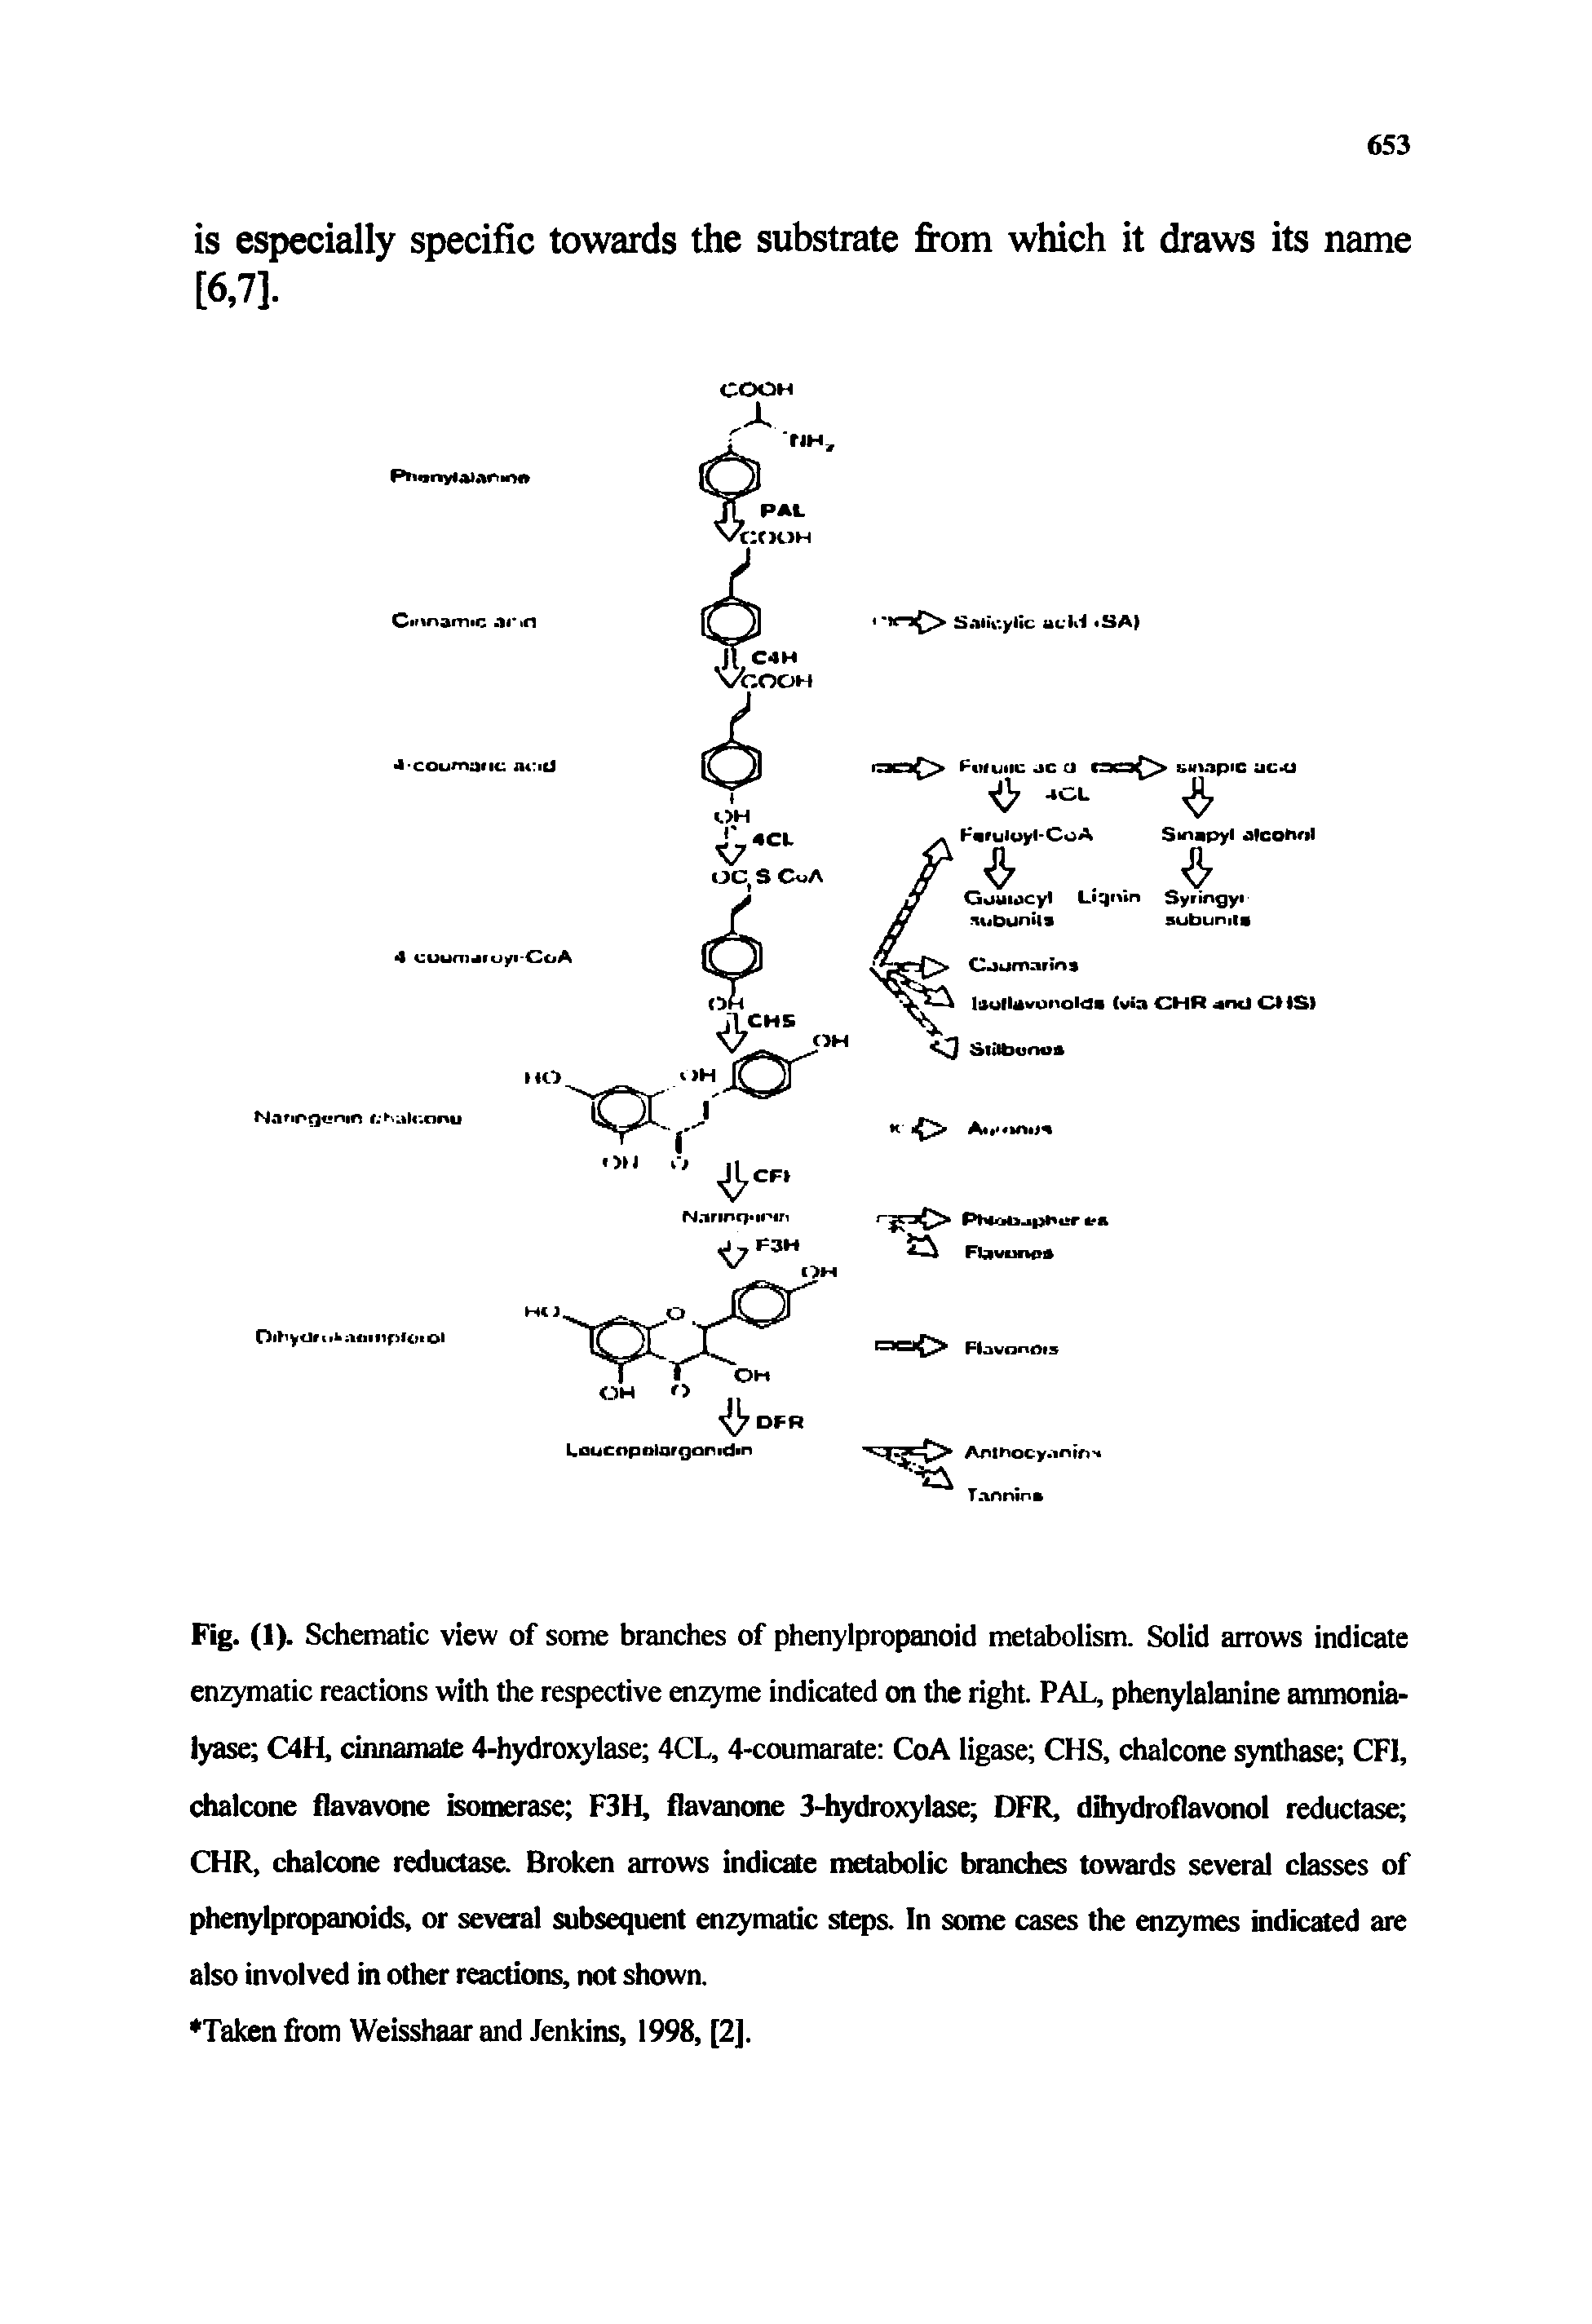 Fig. (1). Schematic view of some branches of phenylpropanoid metabolism. Solid arrows indicate enzymatic reactions with the respective enzyme indicated on the right. PAL, phenylalanine ammonia-lyase C4H, cinnamate 4-hydroxylase 4CL, 4-coumarate CoA ligase CHS, chalcone synthase CF1, chalcone flavavone isomerase F3H, flavanone 3-hydroxylase DFR, dihydroflavonol reductase CHR, chalcone reductase. Broken arrows indicate metabolic branches towards several classes of phenylpropanoids, or several subsequent enzymatic steps. In some cases the enzymes indicated are also involved in other reactions, not shown.